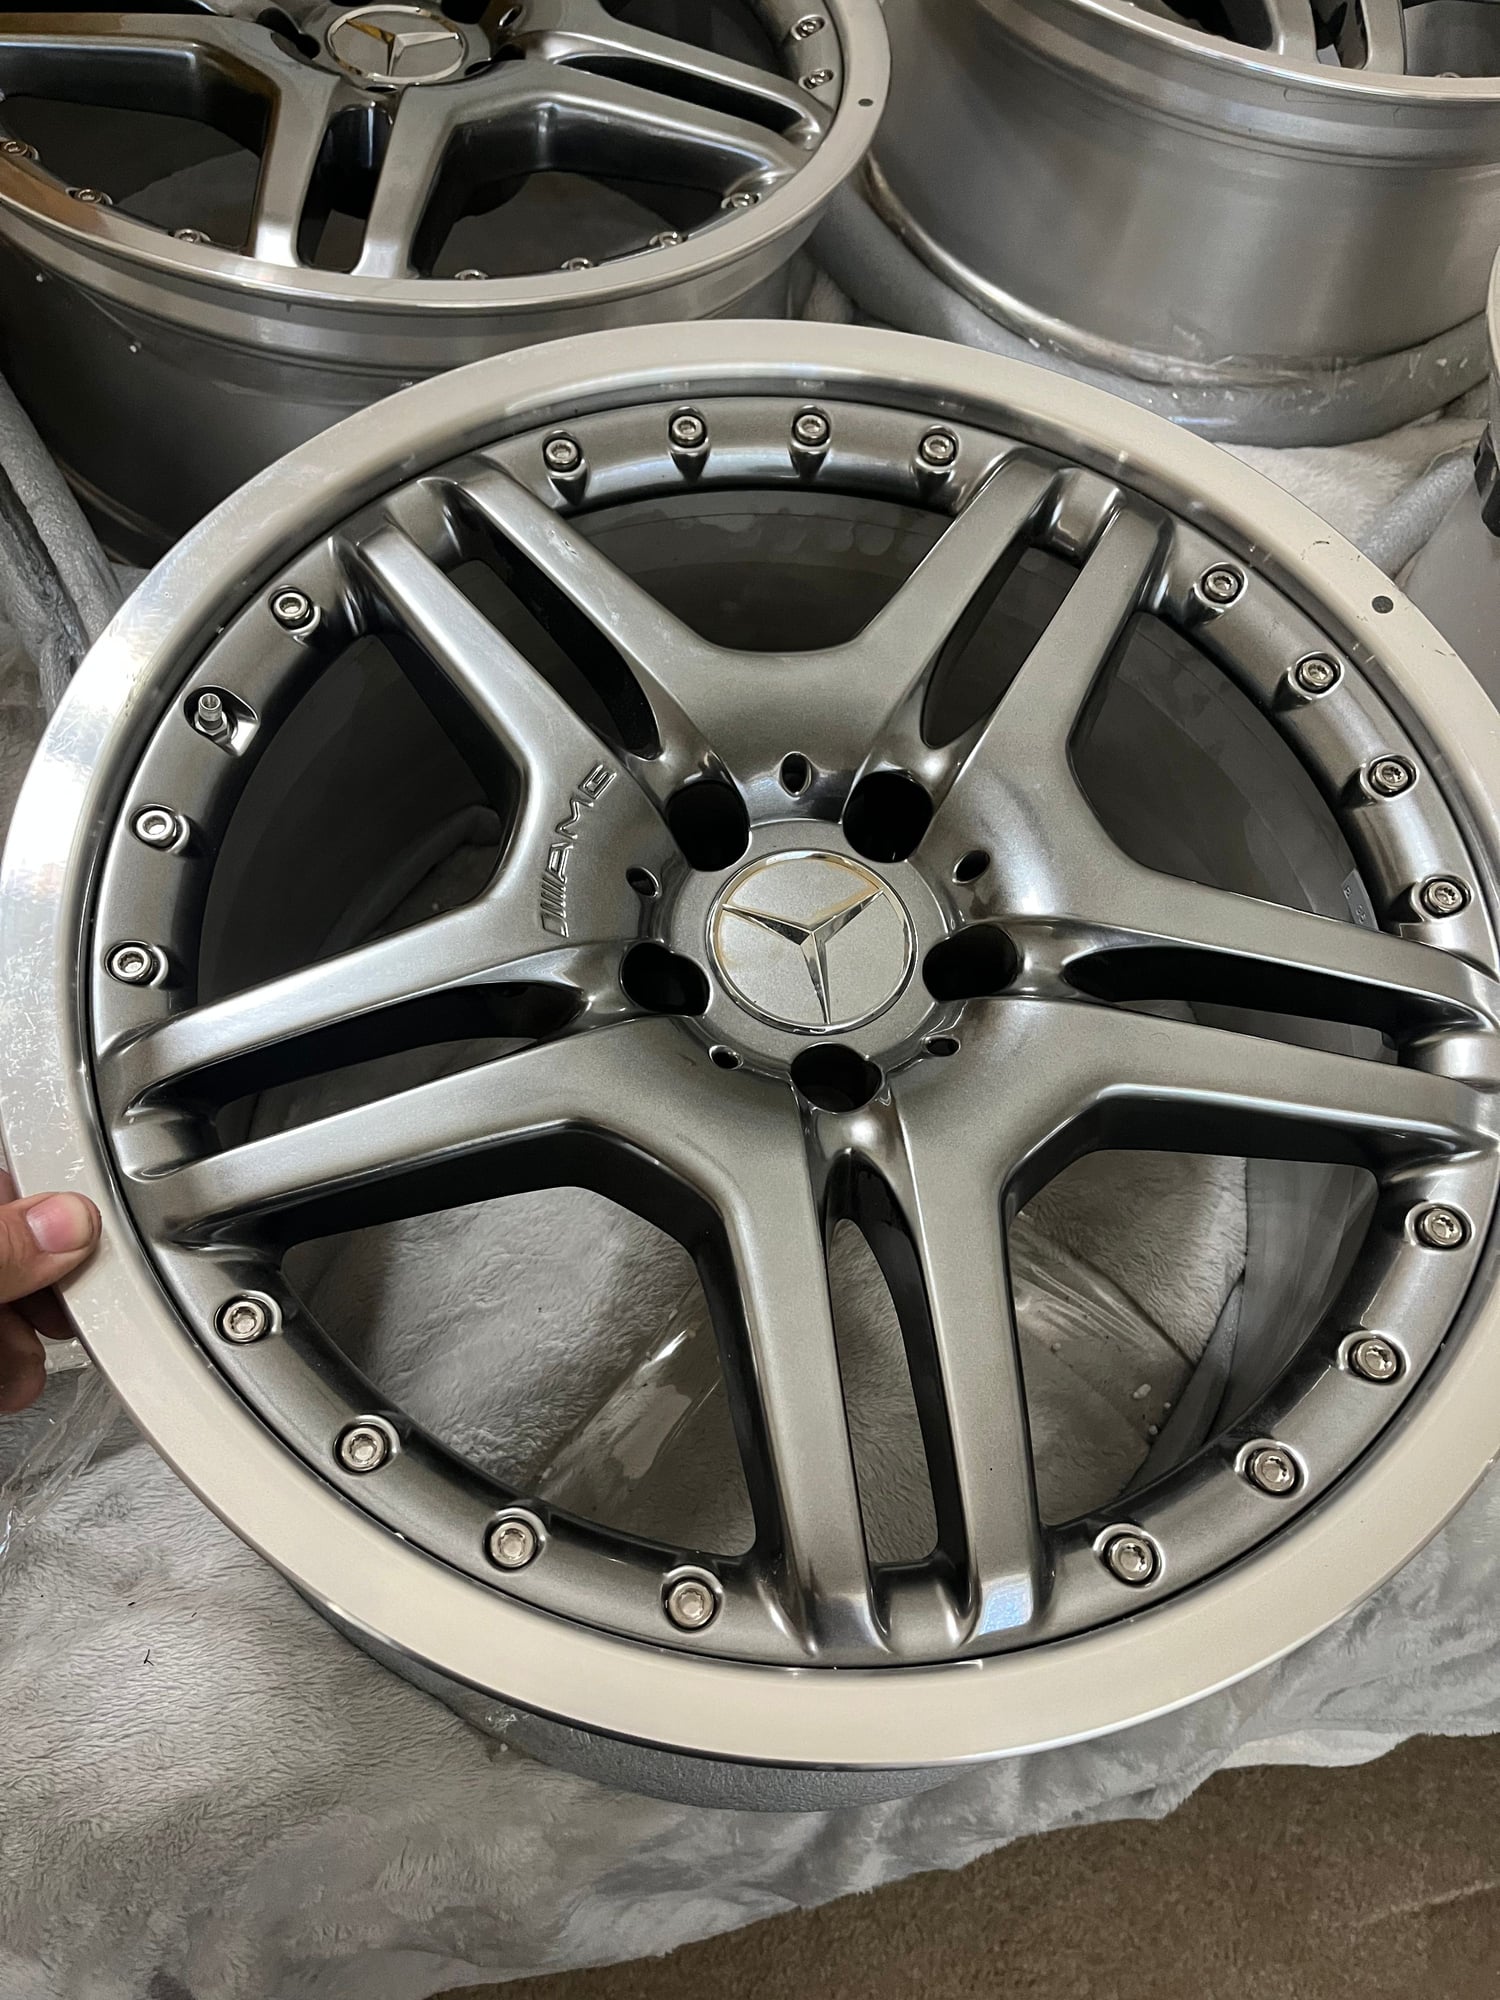 Wheels and Tires/Axles - NOS R230 SL65 wheels - Used - 2003 to 2011 Mercedes-Benz R320 - Austin, TX 78665, United States